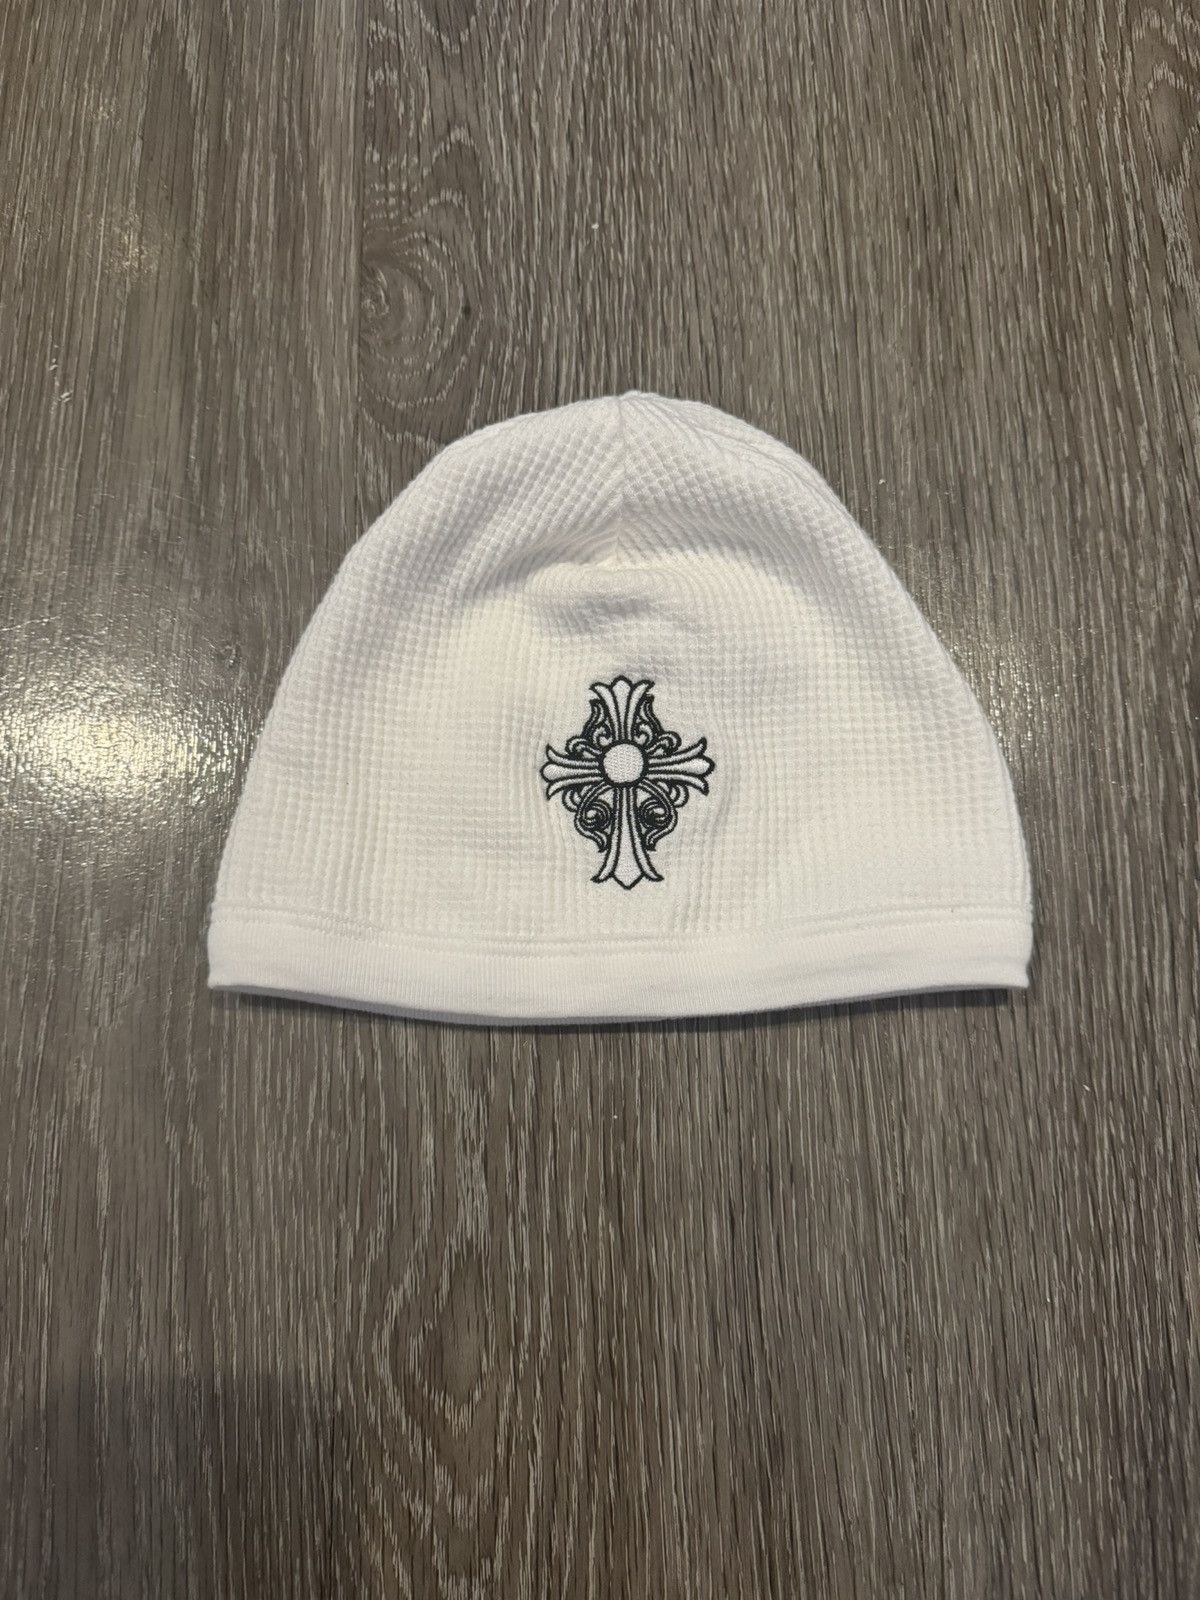 Pre-owned Chrome Hearts Vintage Waffle Thermal Beanie Hat White